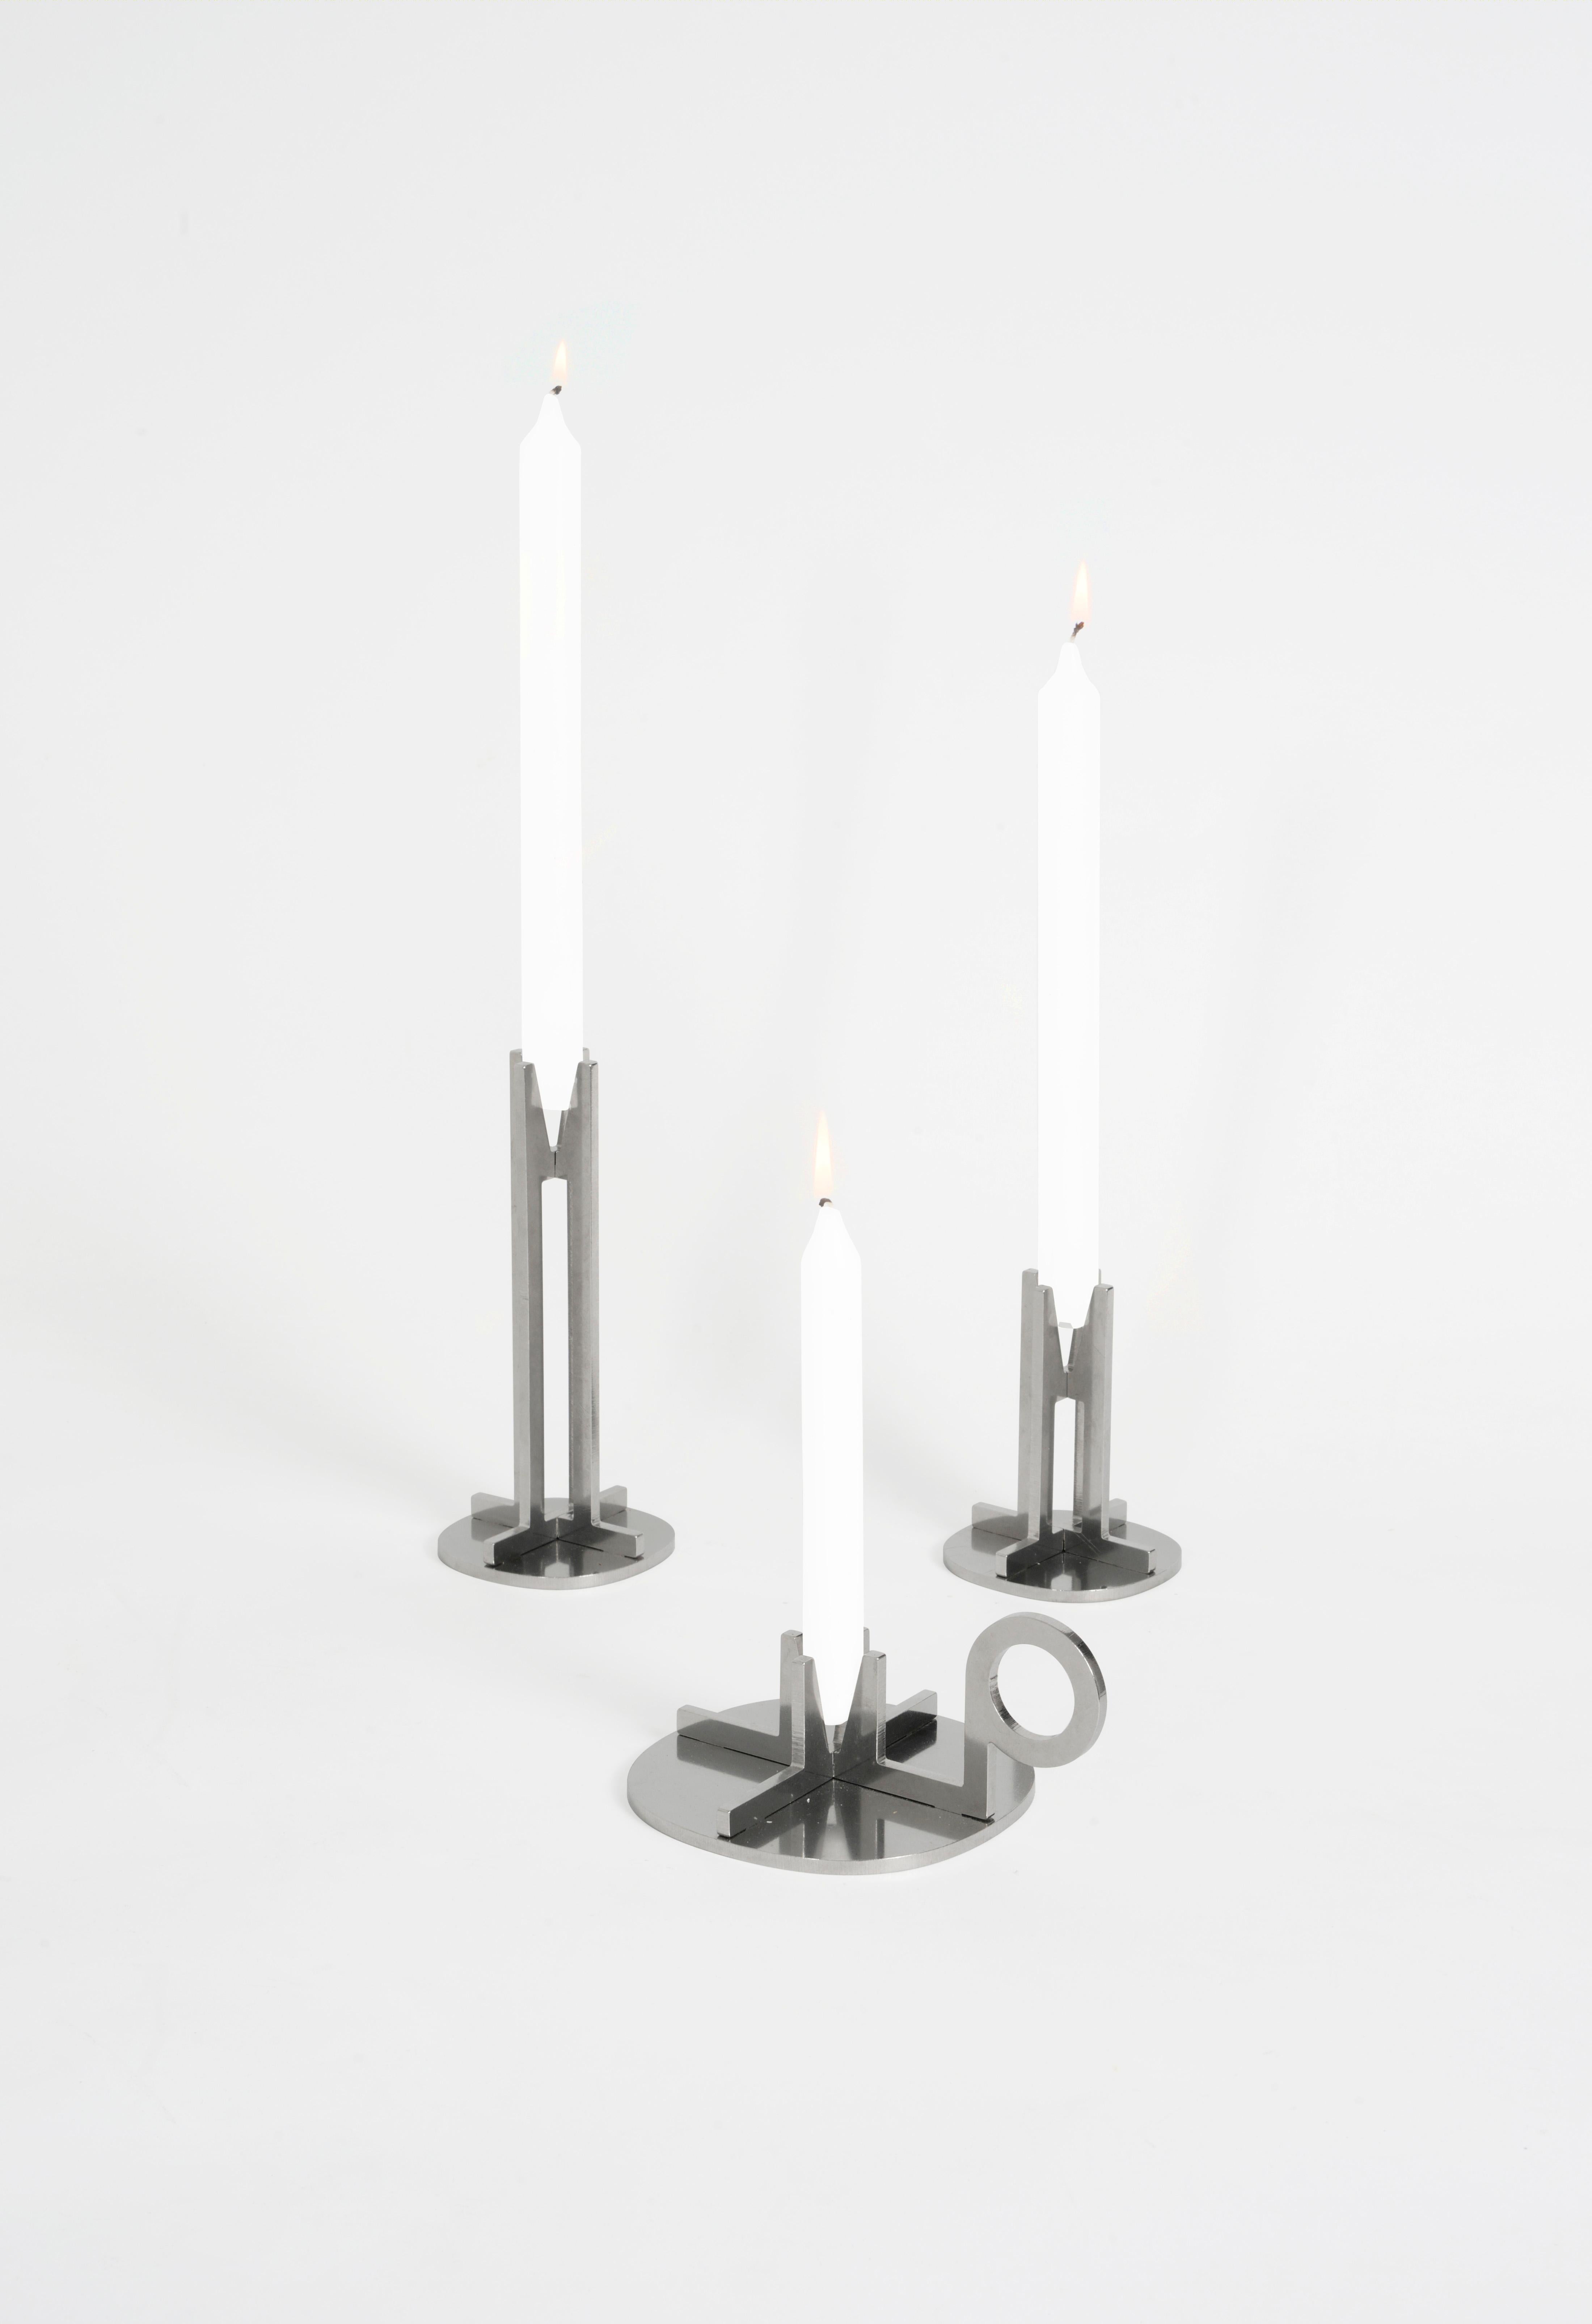 Post-Modern Crocera Stainless Steel Candle Holder Design Enrico Girotti, Made by Lapiega